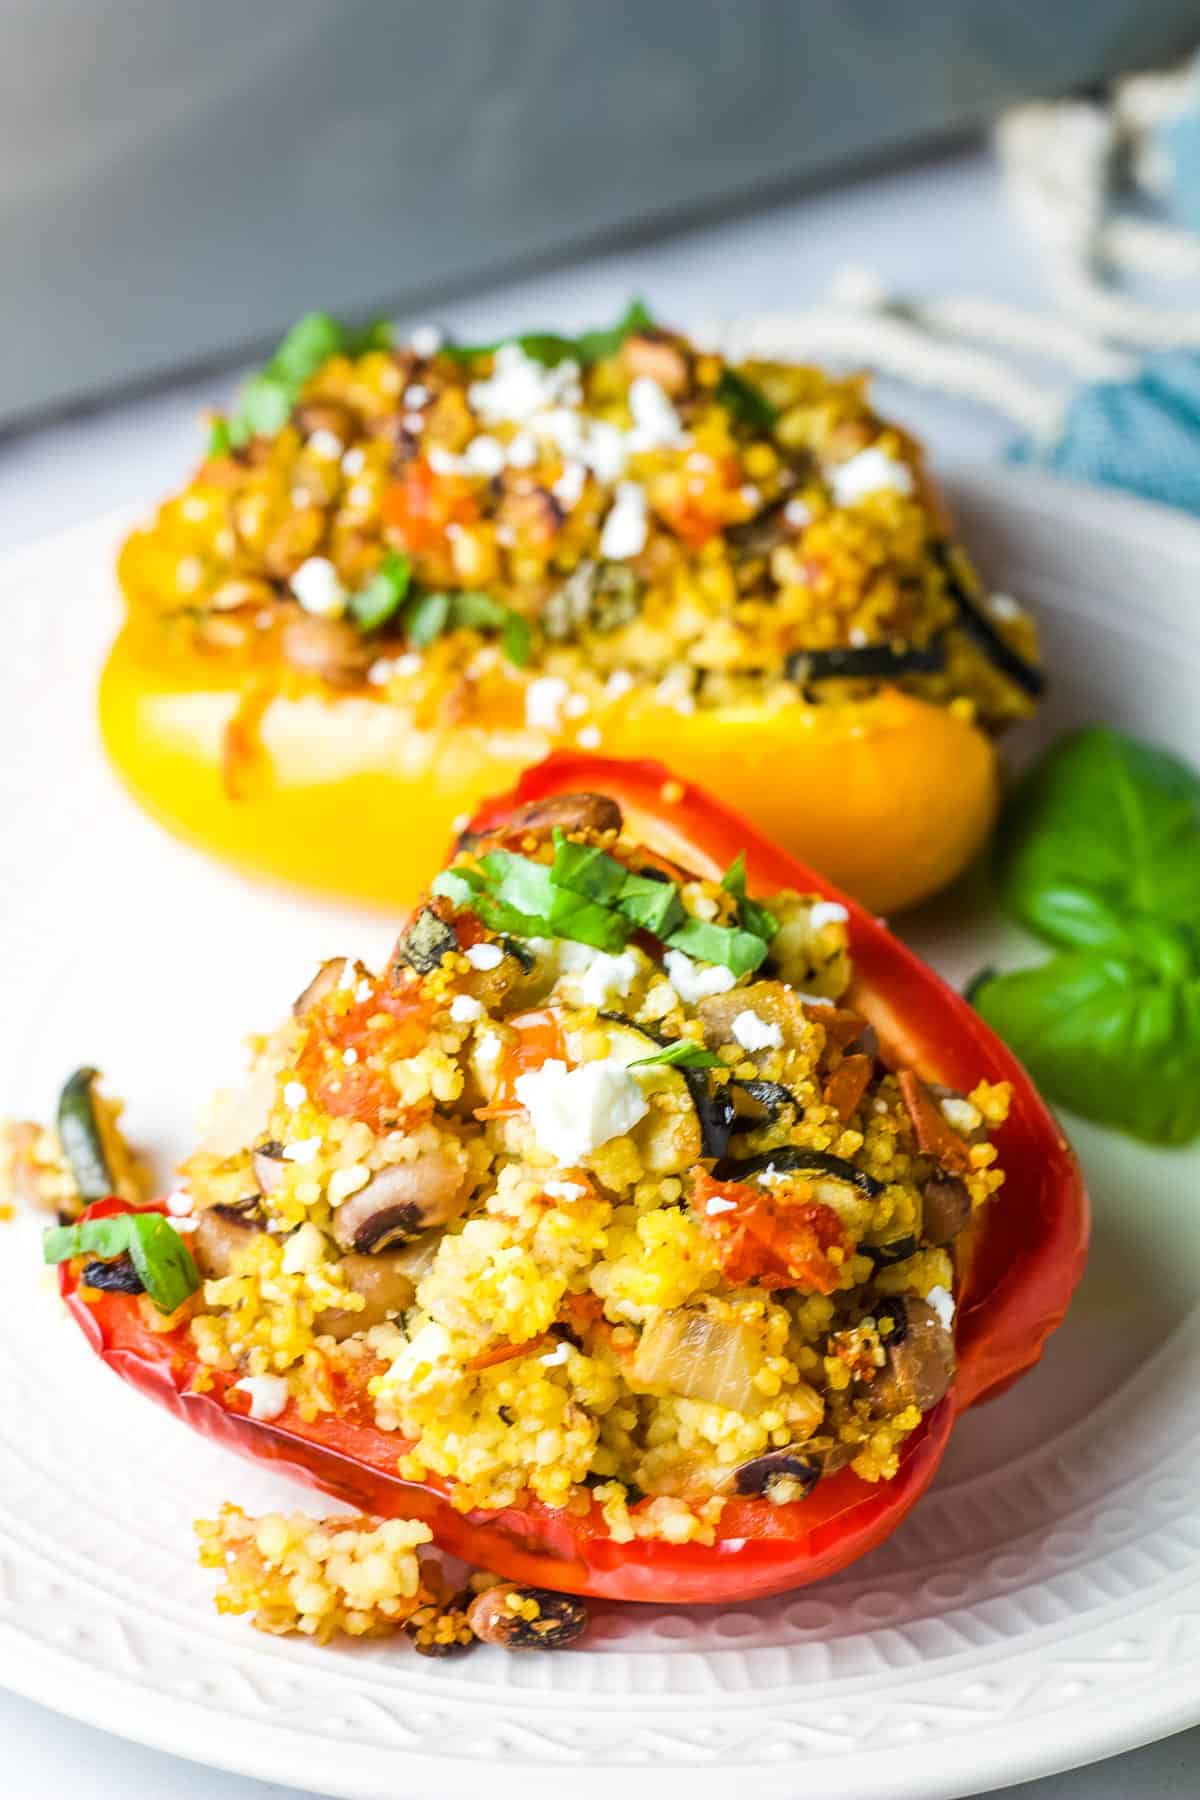 Two stuffed bell pepper halves on a plate